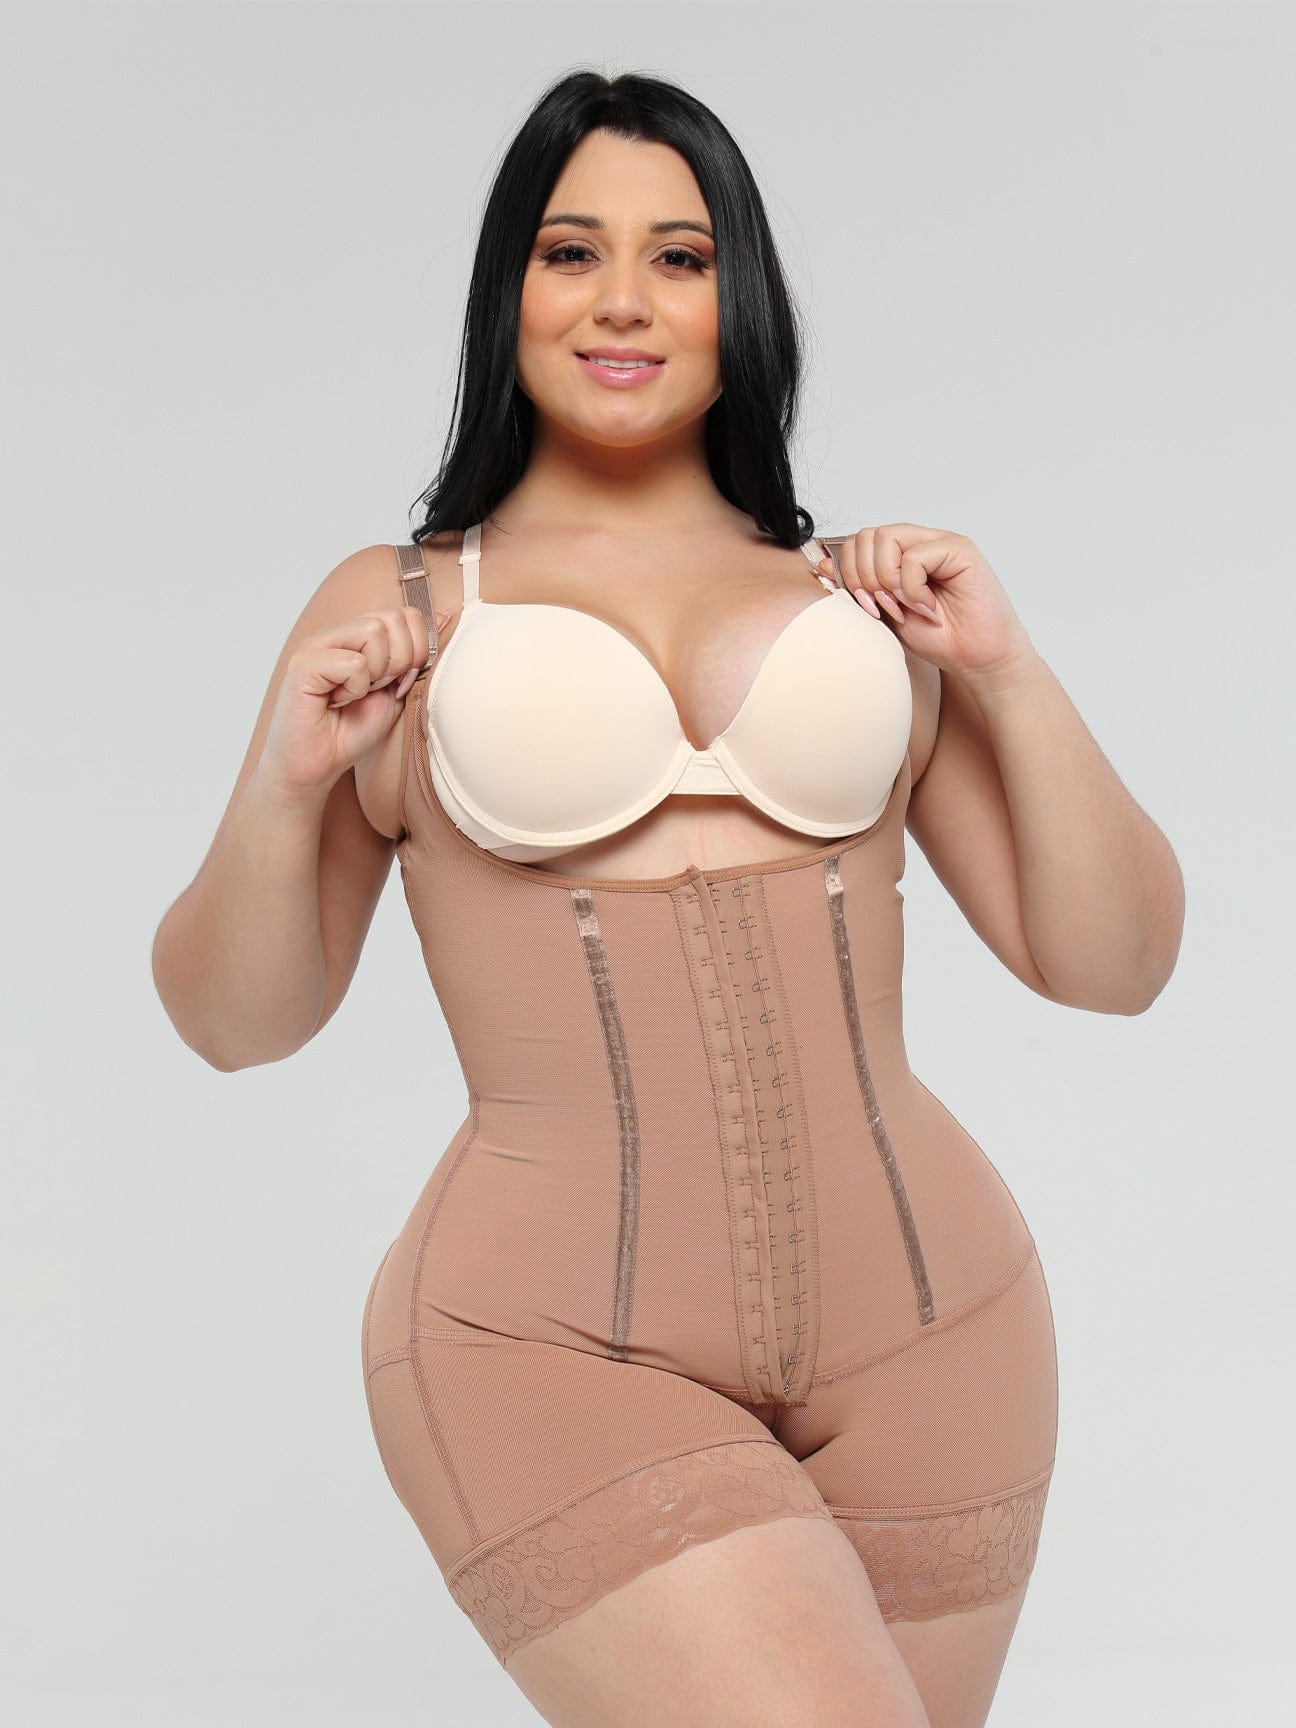 Faja Colombianas Post Surgery Shapers Women High Compression Corset  Hourglass Fgure Skims Girdles Sexy Charming Curves Shapewear Pink